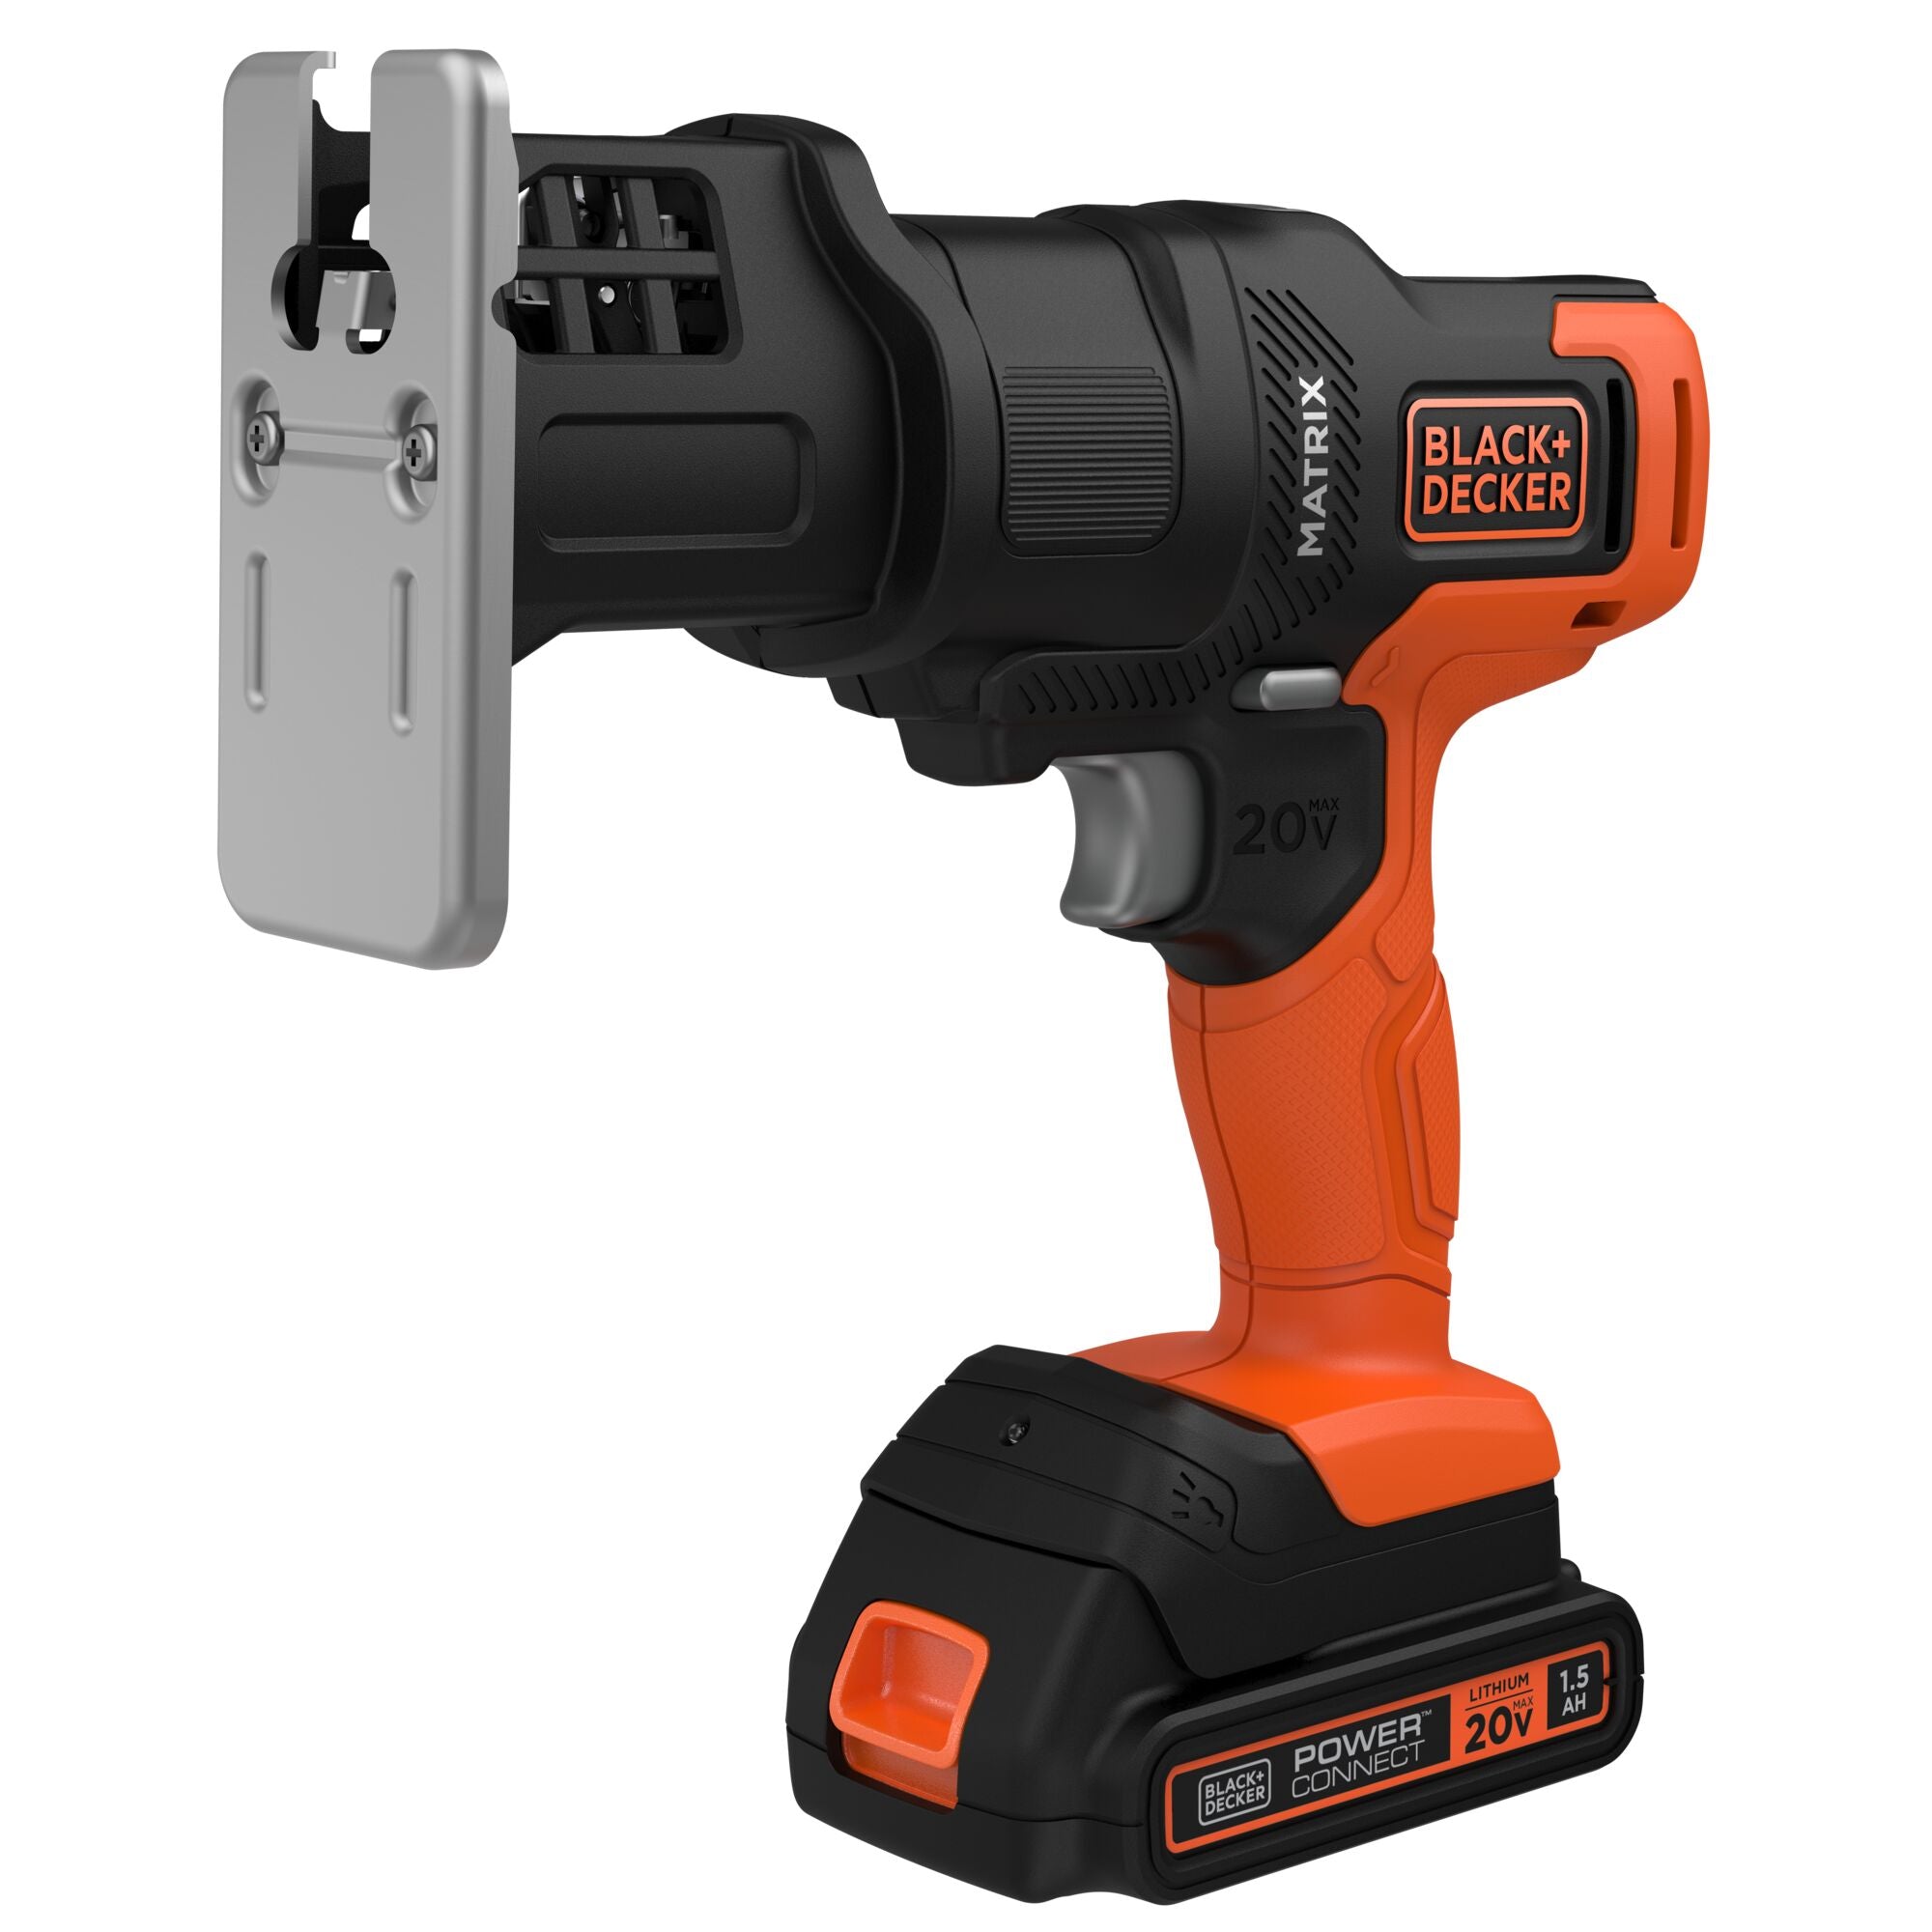 Black and Decker B20V MAX* POWERCONNECT Cordless Jigsaw Kit BDCJS20C from  Black and Decker - Acme Tools